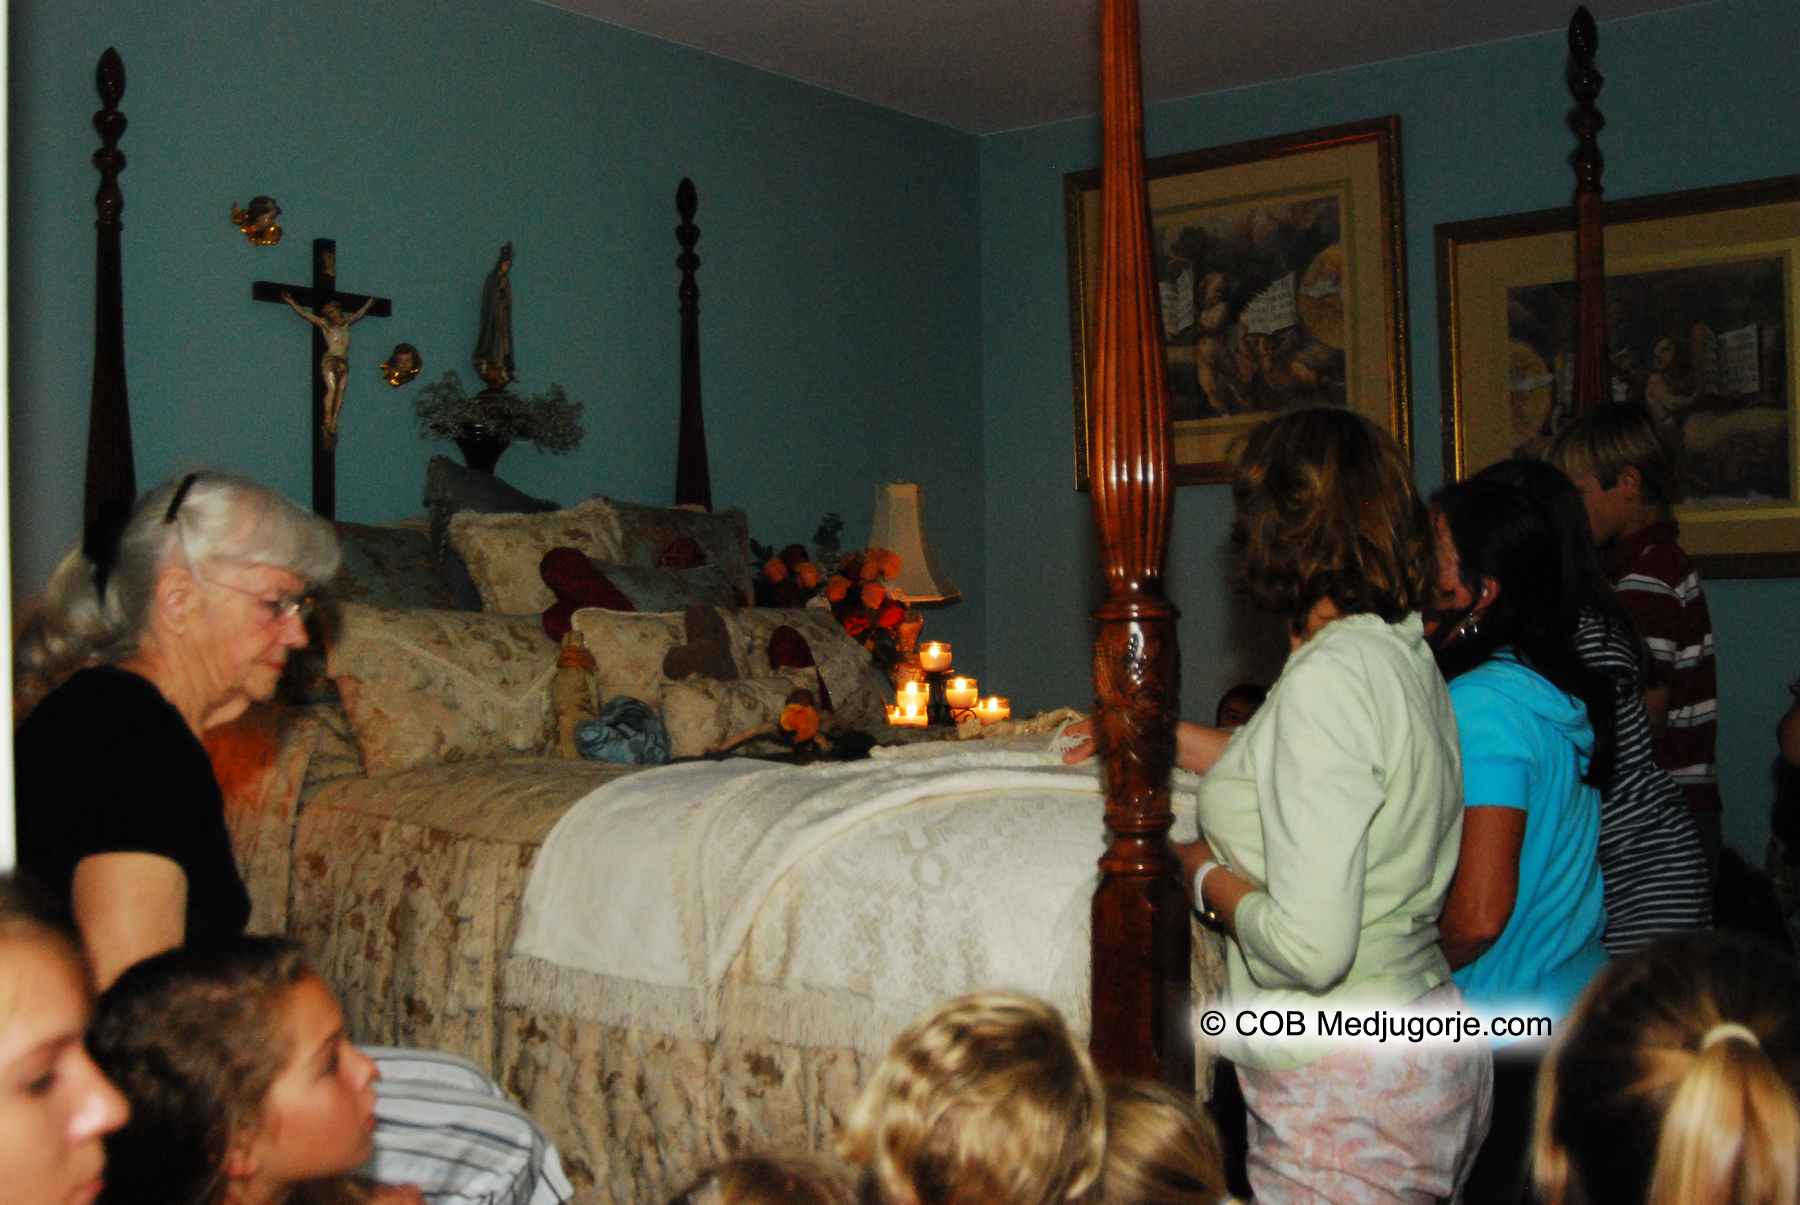 community praying in the bedroom